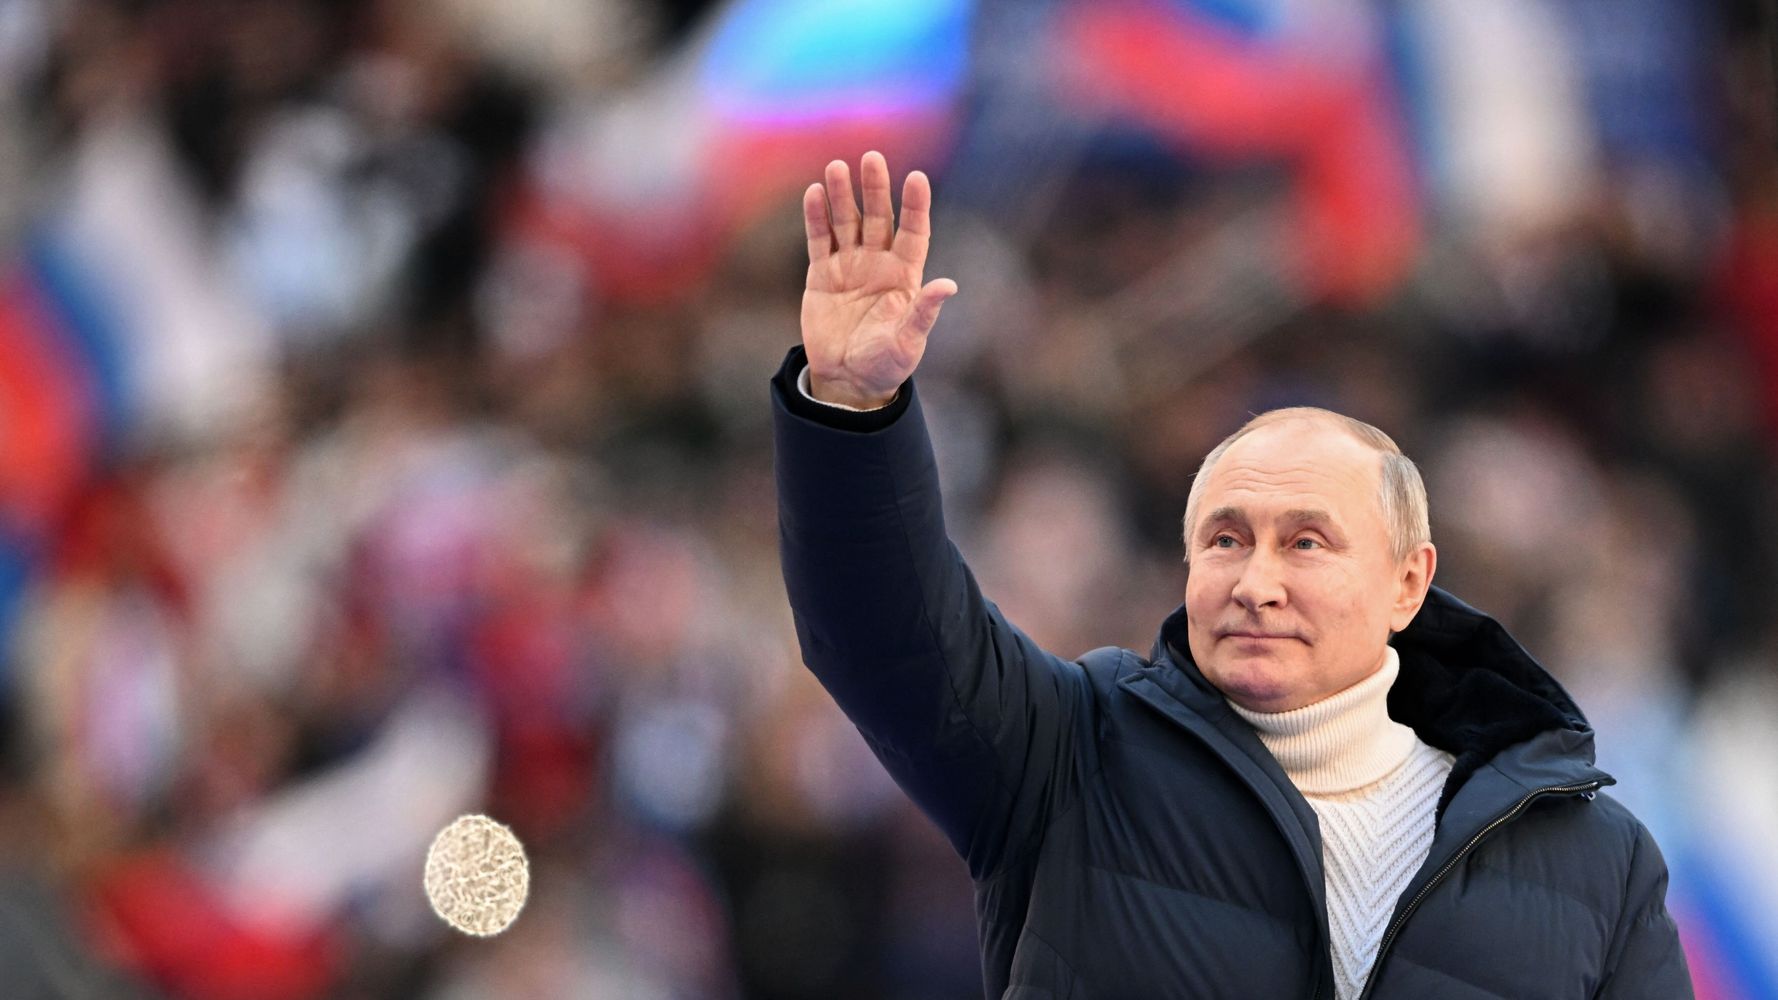 Putin Speaks At Massive Moscow Rally